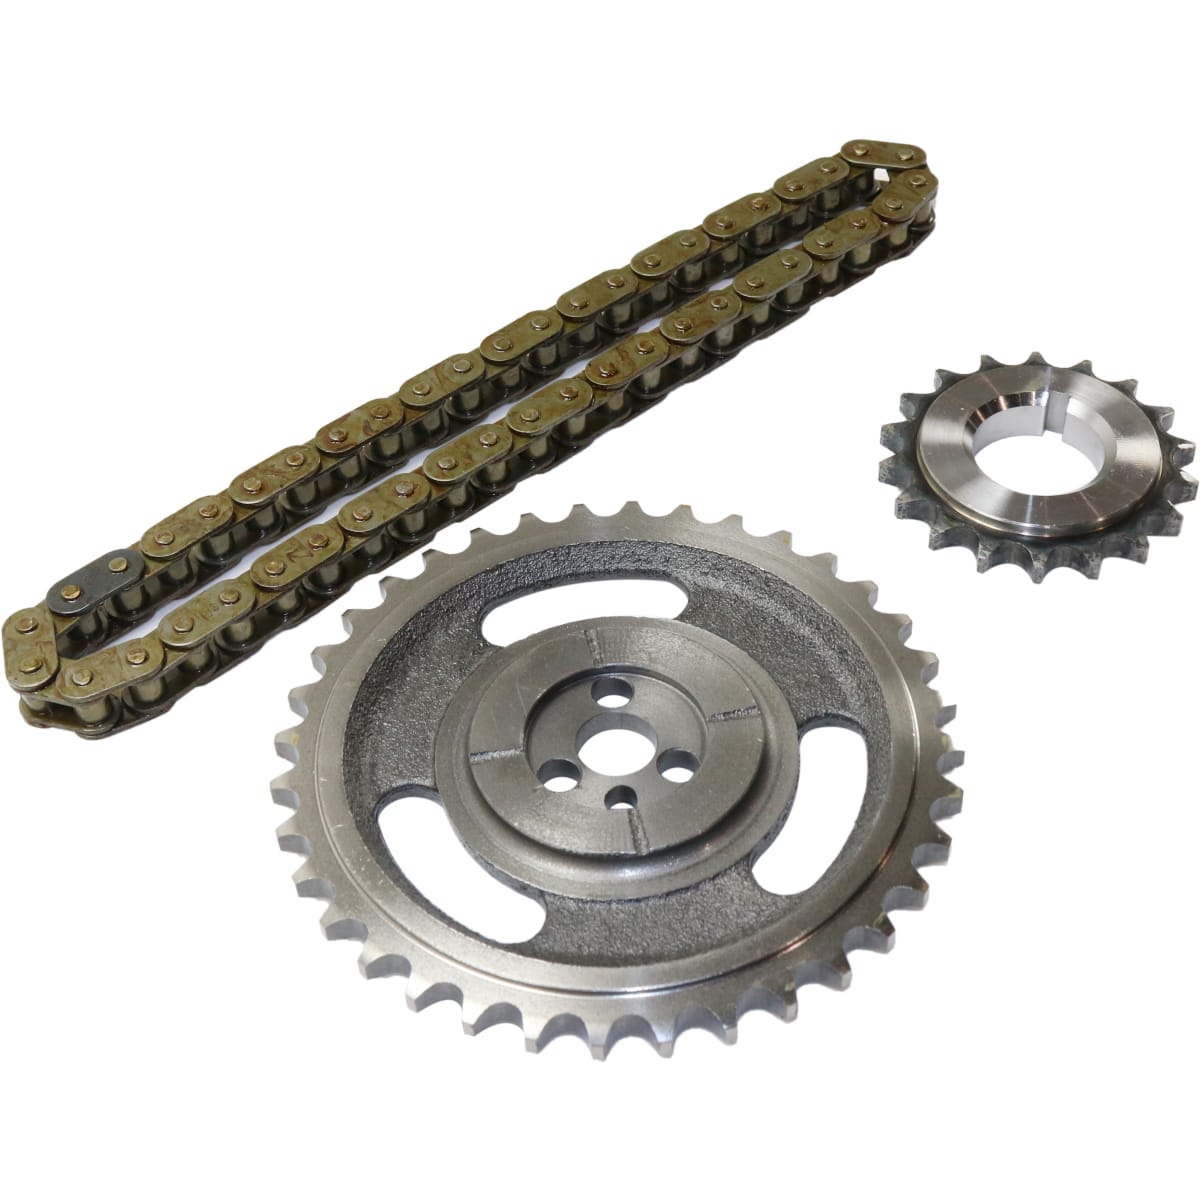 1998 Chevrolet Express 1500 Timing Chain Kit - 8 Cylinder, 5.7 Liter ...